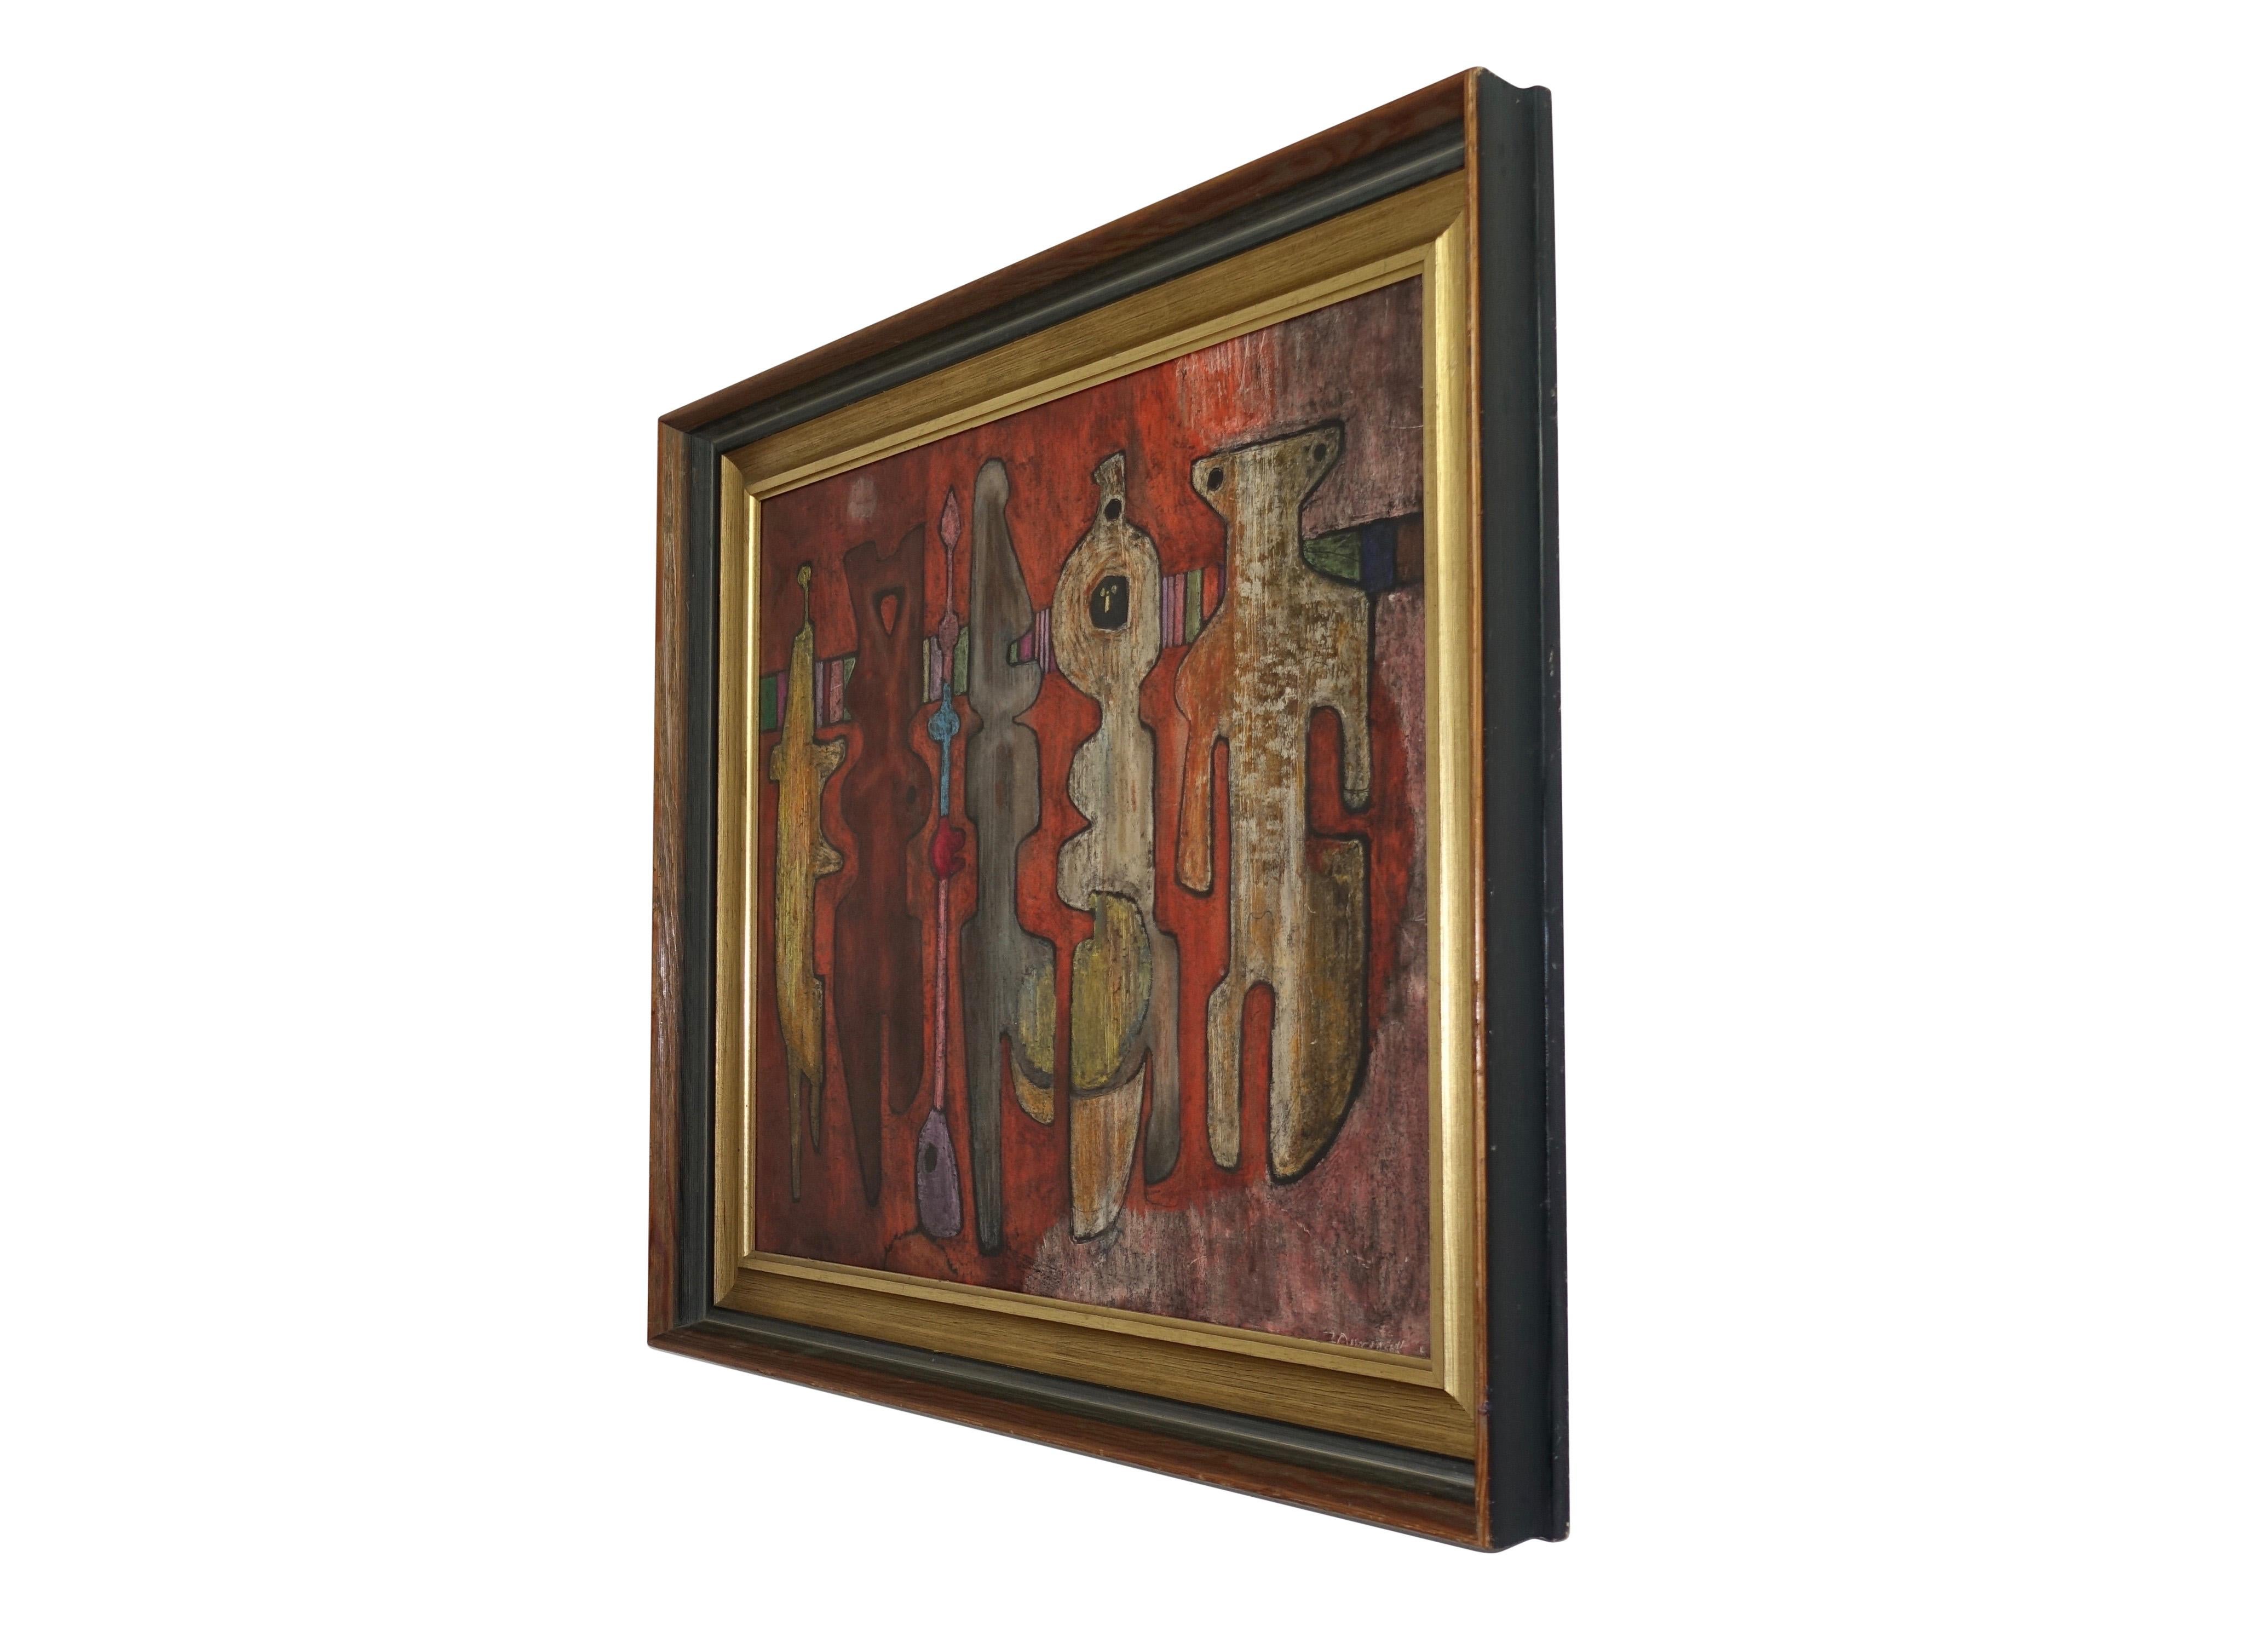 Framed abstract painting of figures in various shapes, oil on panel. Signed indistinctly in the lower left, partly obscured by the frame, Oliver?. American, circa 1970s. 
Painting size without frame measures, Height-22 inches x Width-26 inches.